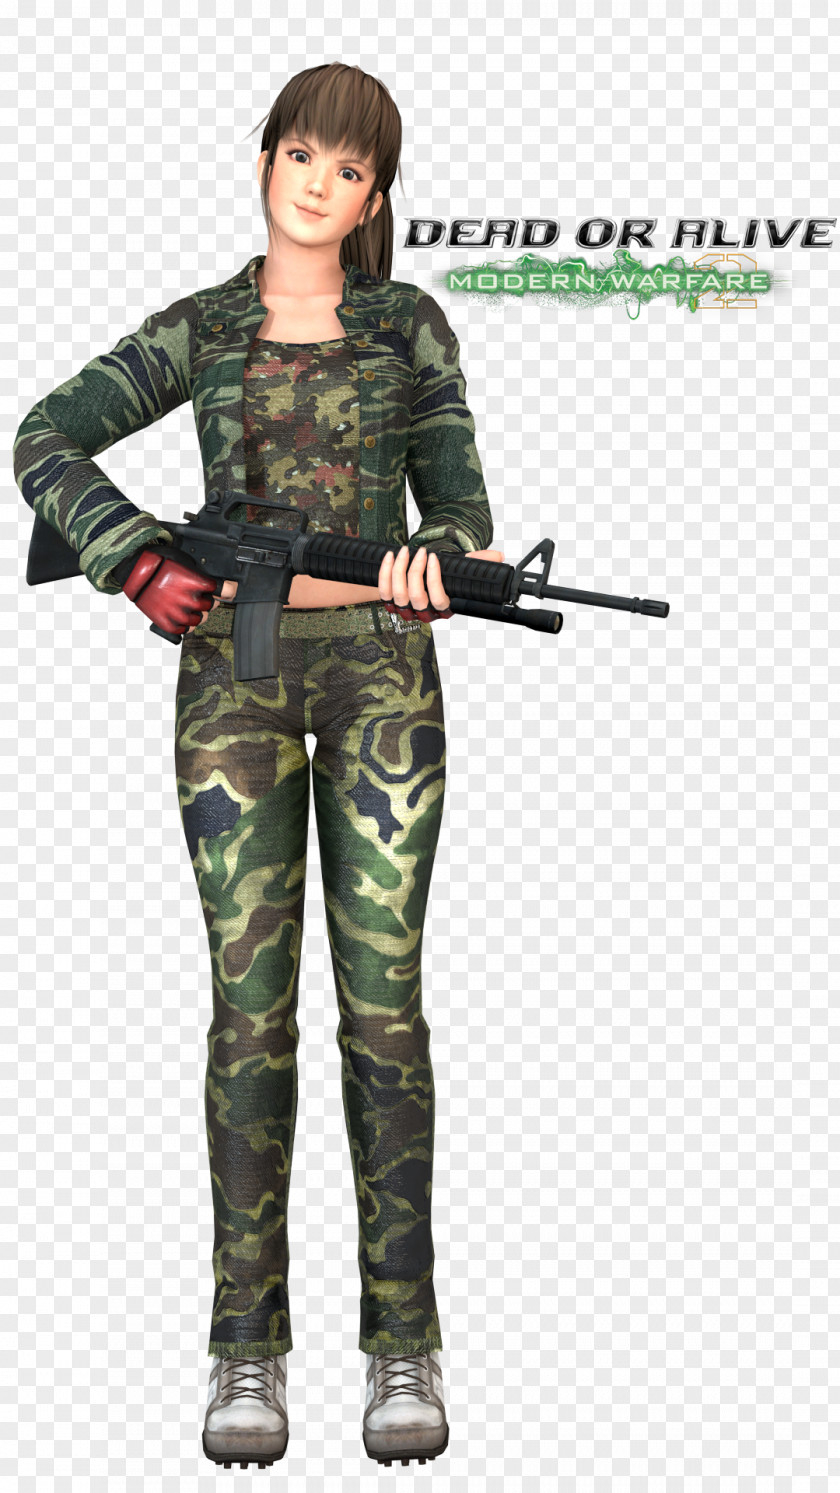 Soldier Military Camouflage Dead Or Alive 5 Infantry Call Of Duty 4: Modern Warfare PNG